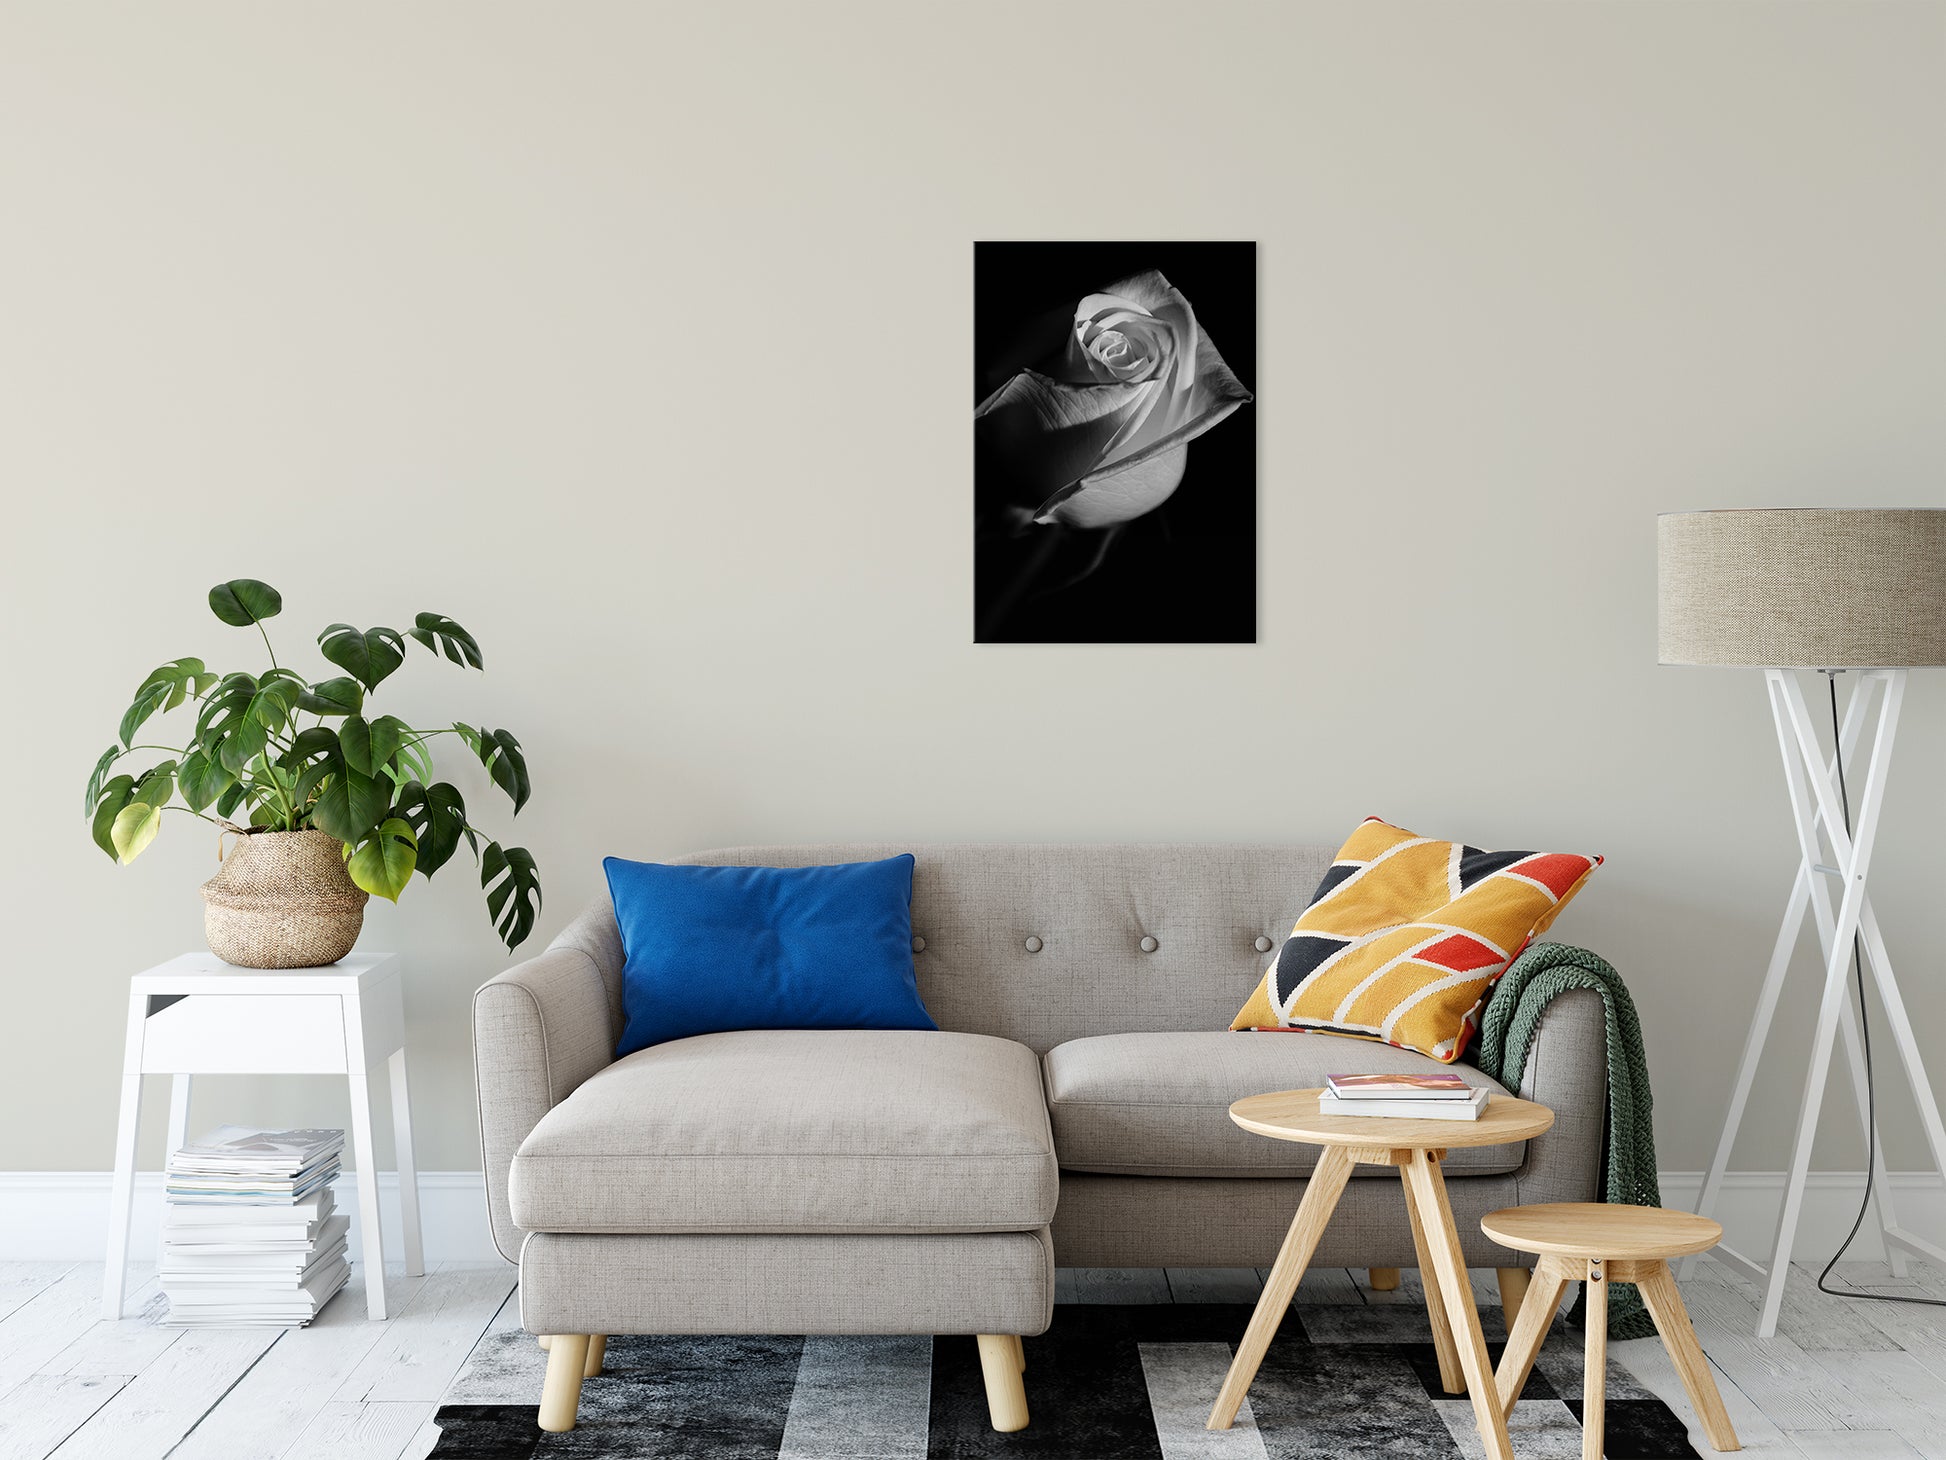 Rose on Black Black & White Nature / Floral Photo Fine Art Canvas Wall Art Prints 20" x 30" - PIPAFINEART